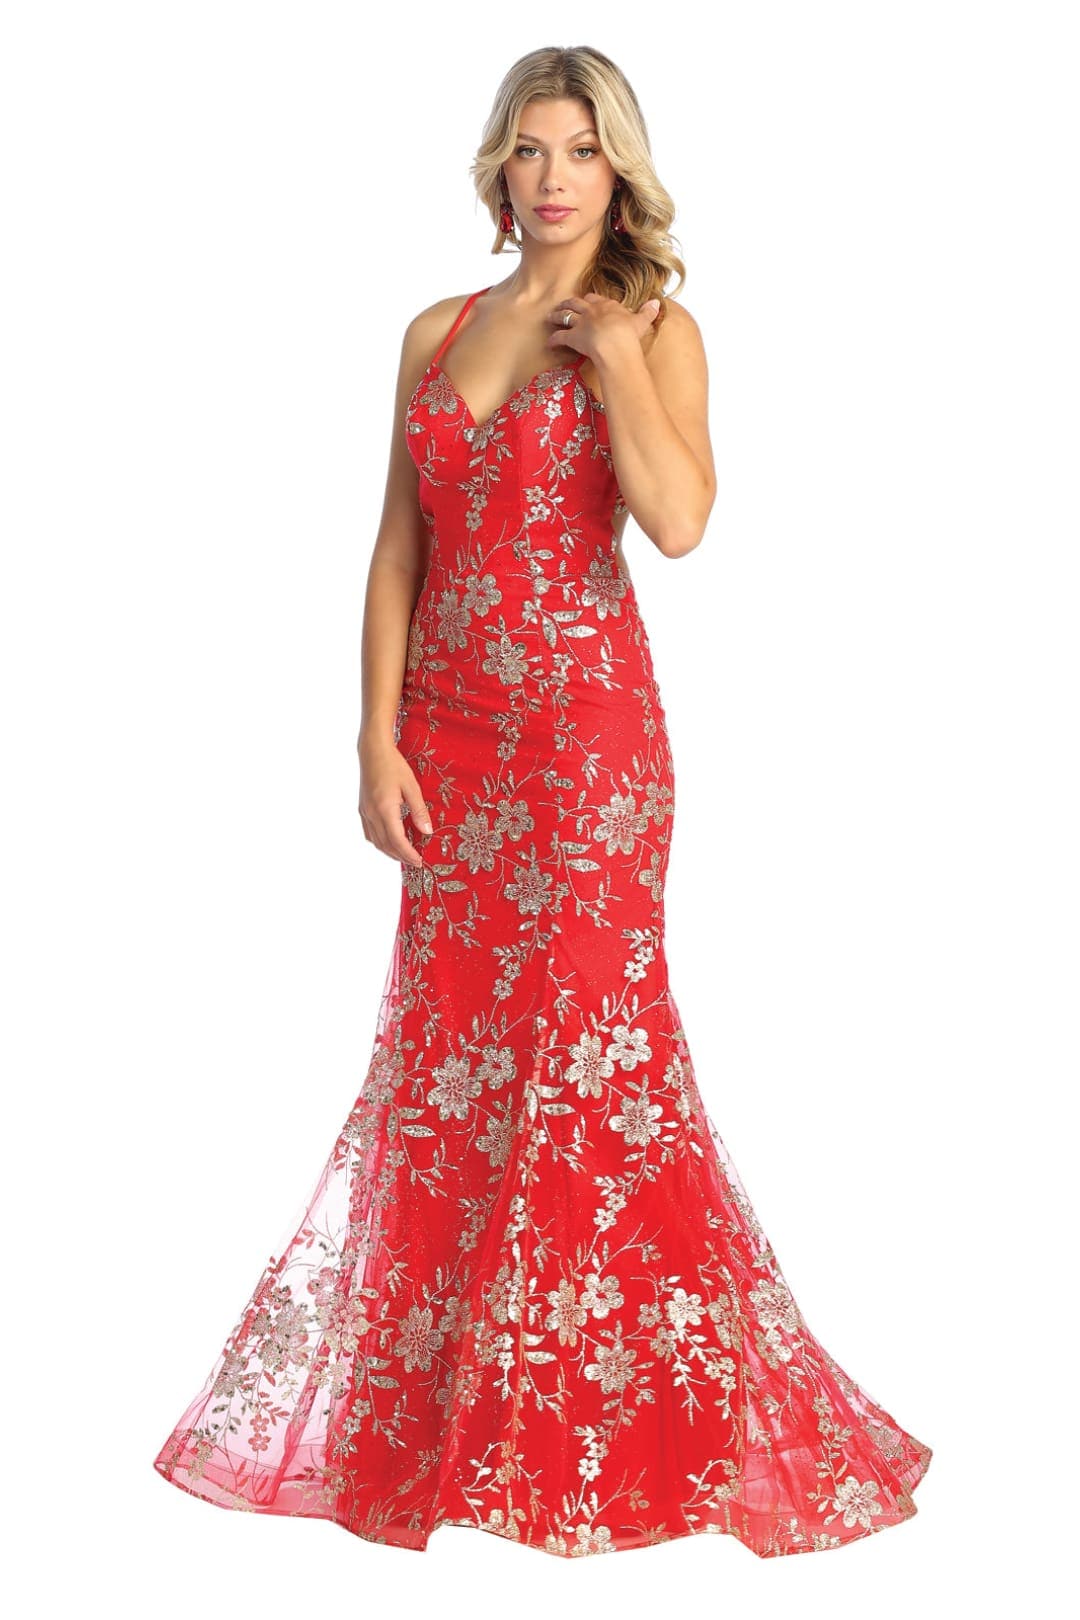 Floral Glitter Mermaid Prom Gown